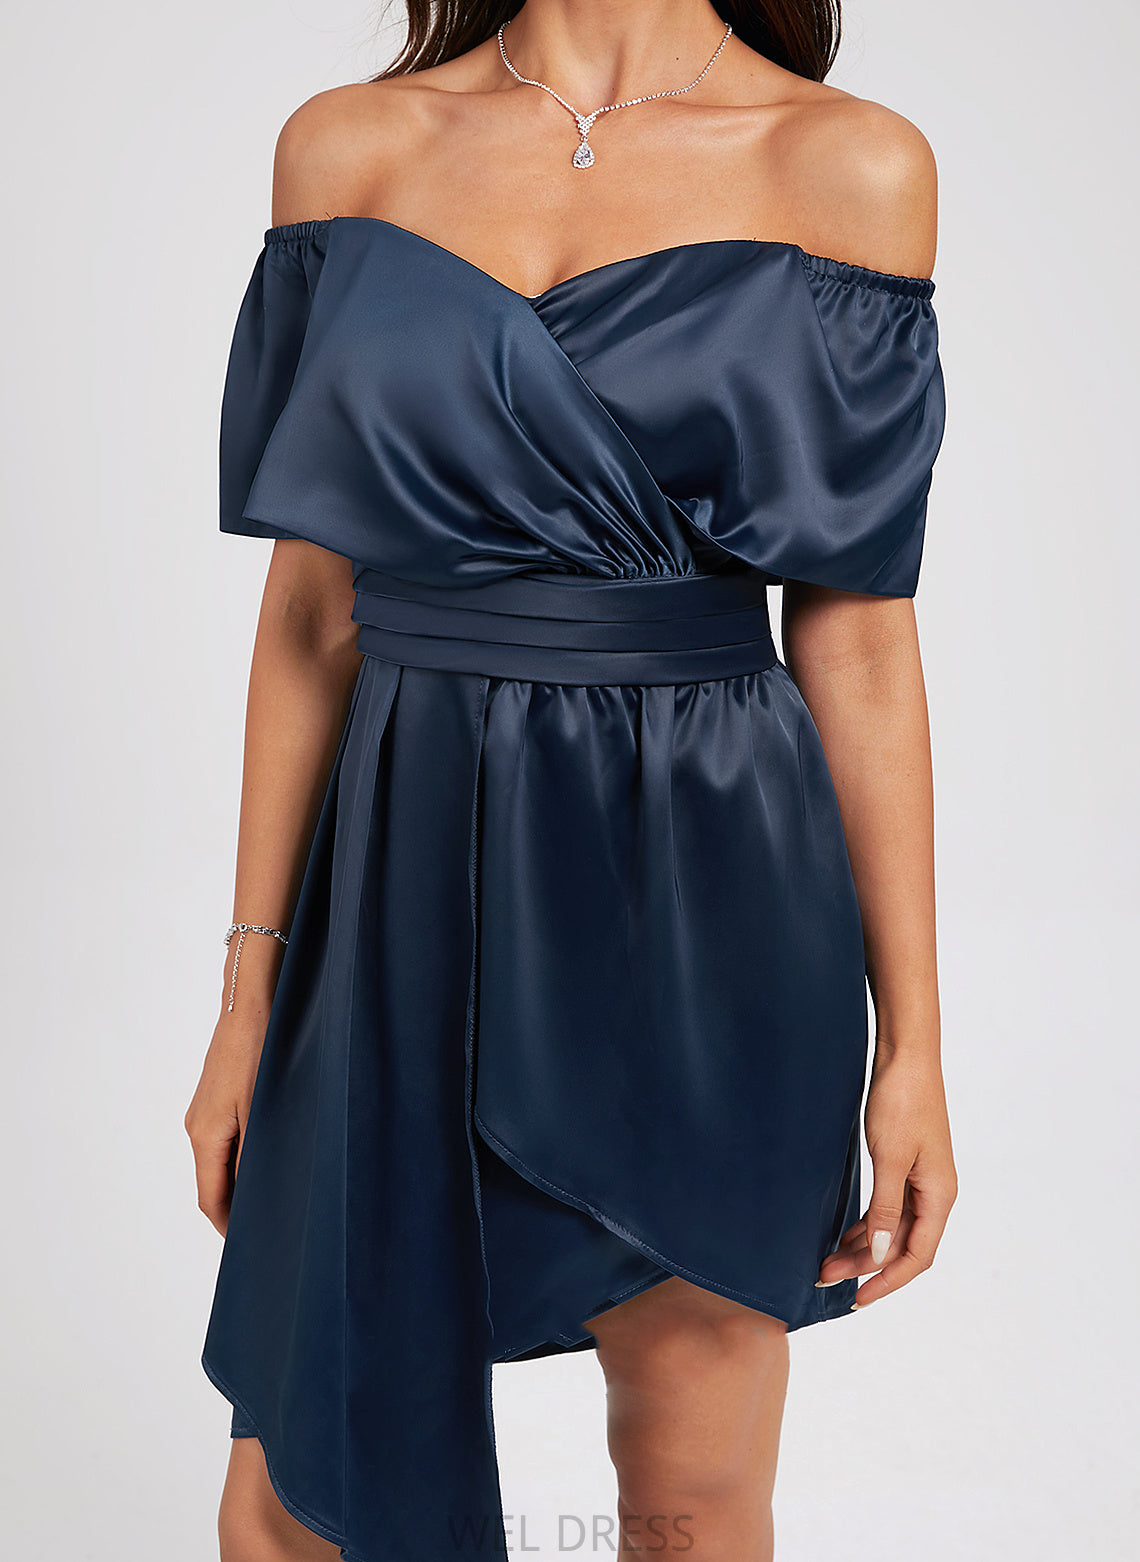 Homecoming Dresses Dress Sheath/Column With Off-the-Shoulder Brenna Homecoming Pleated Asymmetrical